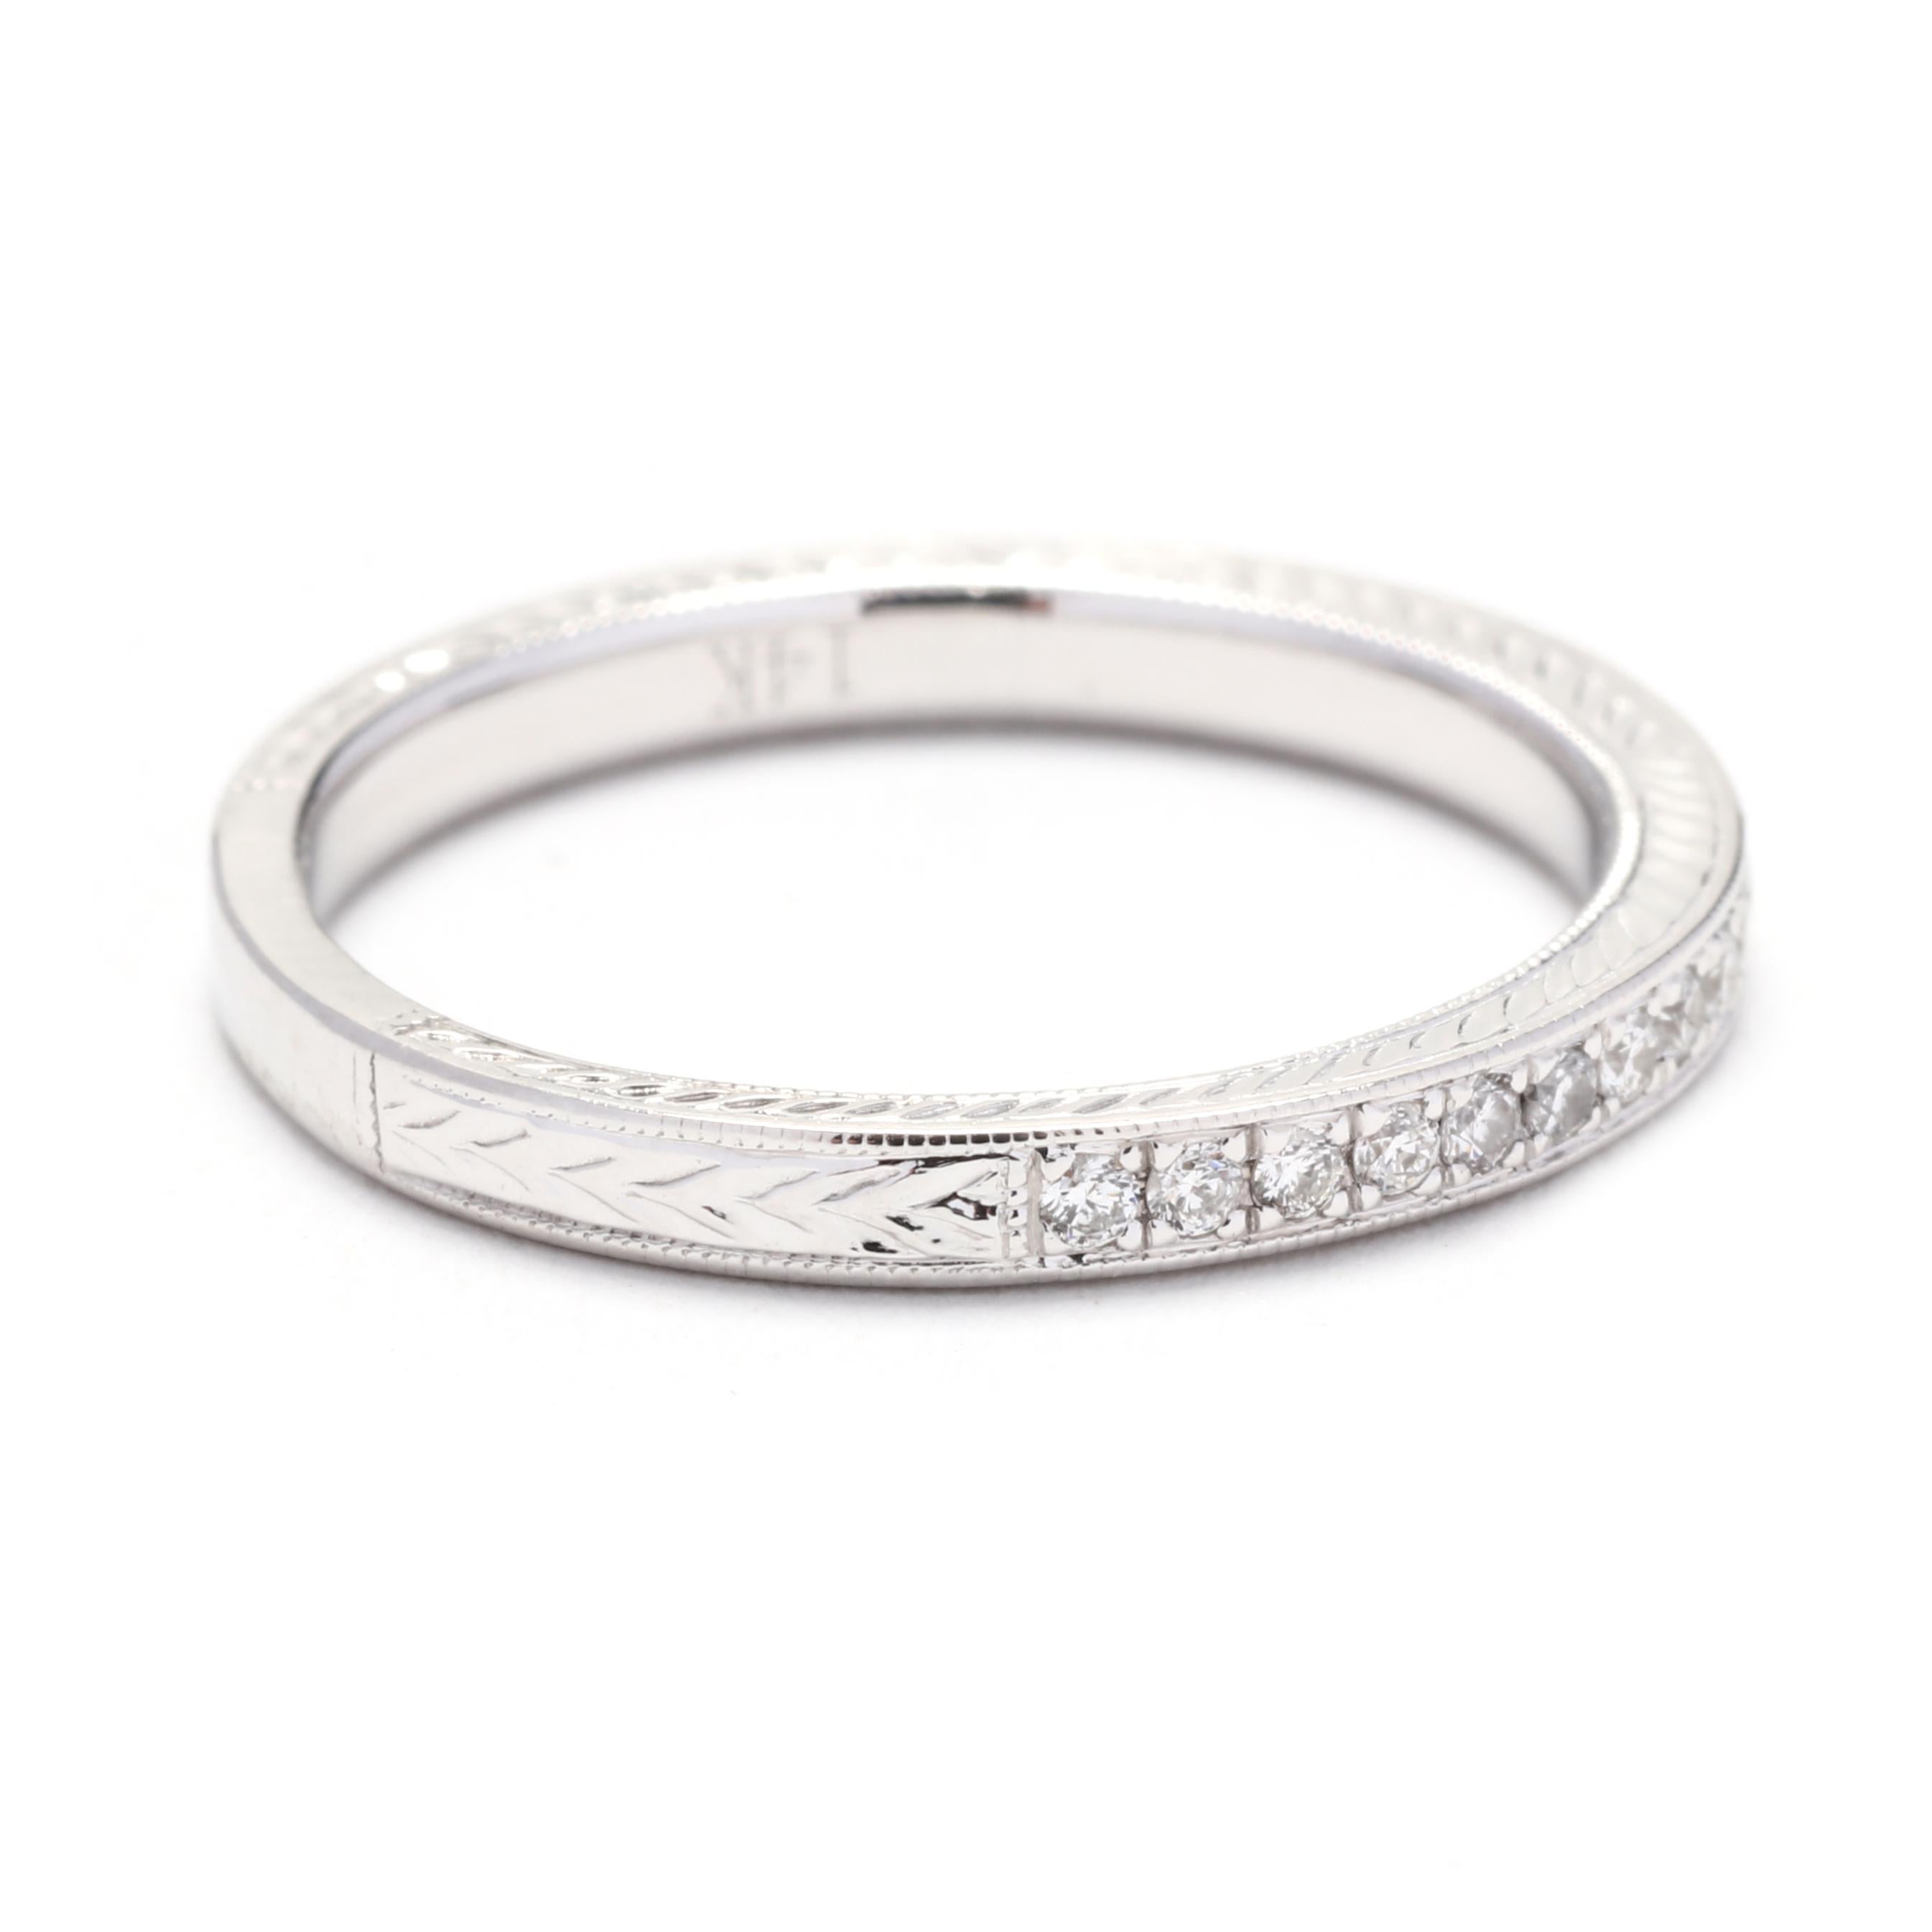 This engraved diamond wedding band is a stunning choice for a timeless and elegant look. Crafted in 14K white gold, it features a total carat weight of 0.30ctw of round cut diamonds. The diamonds are carefully set in a channel setting, creating a